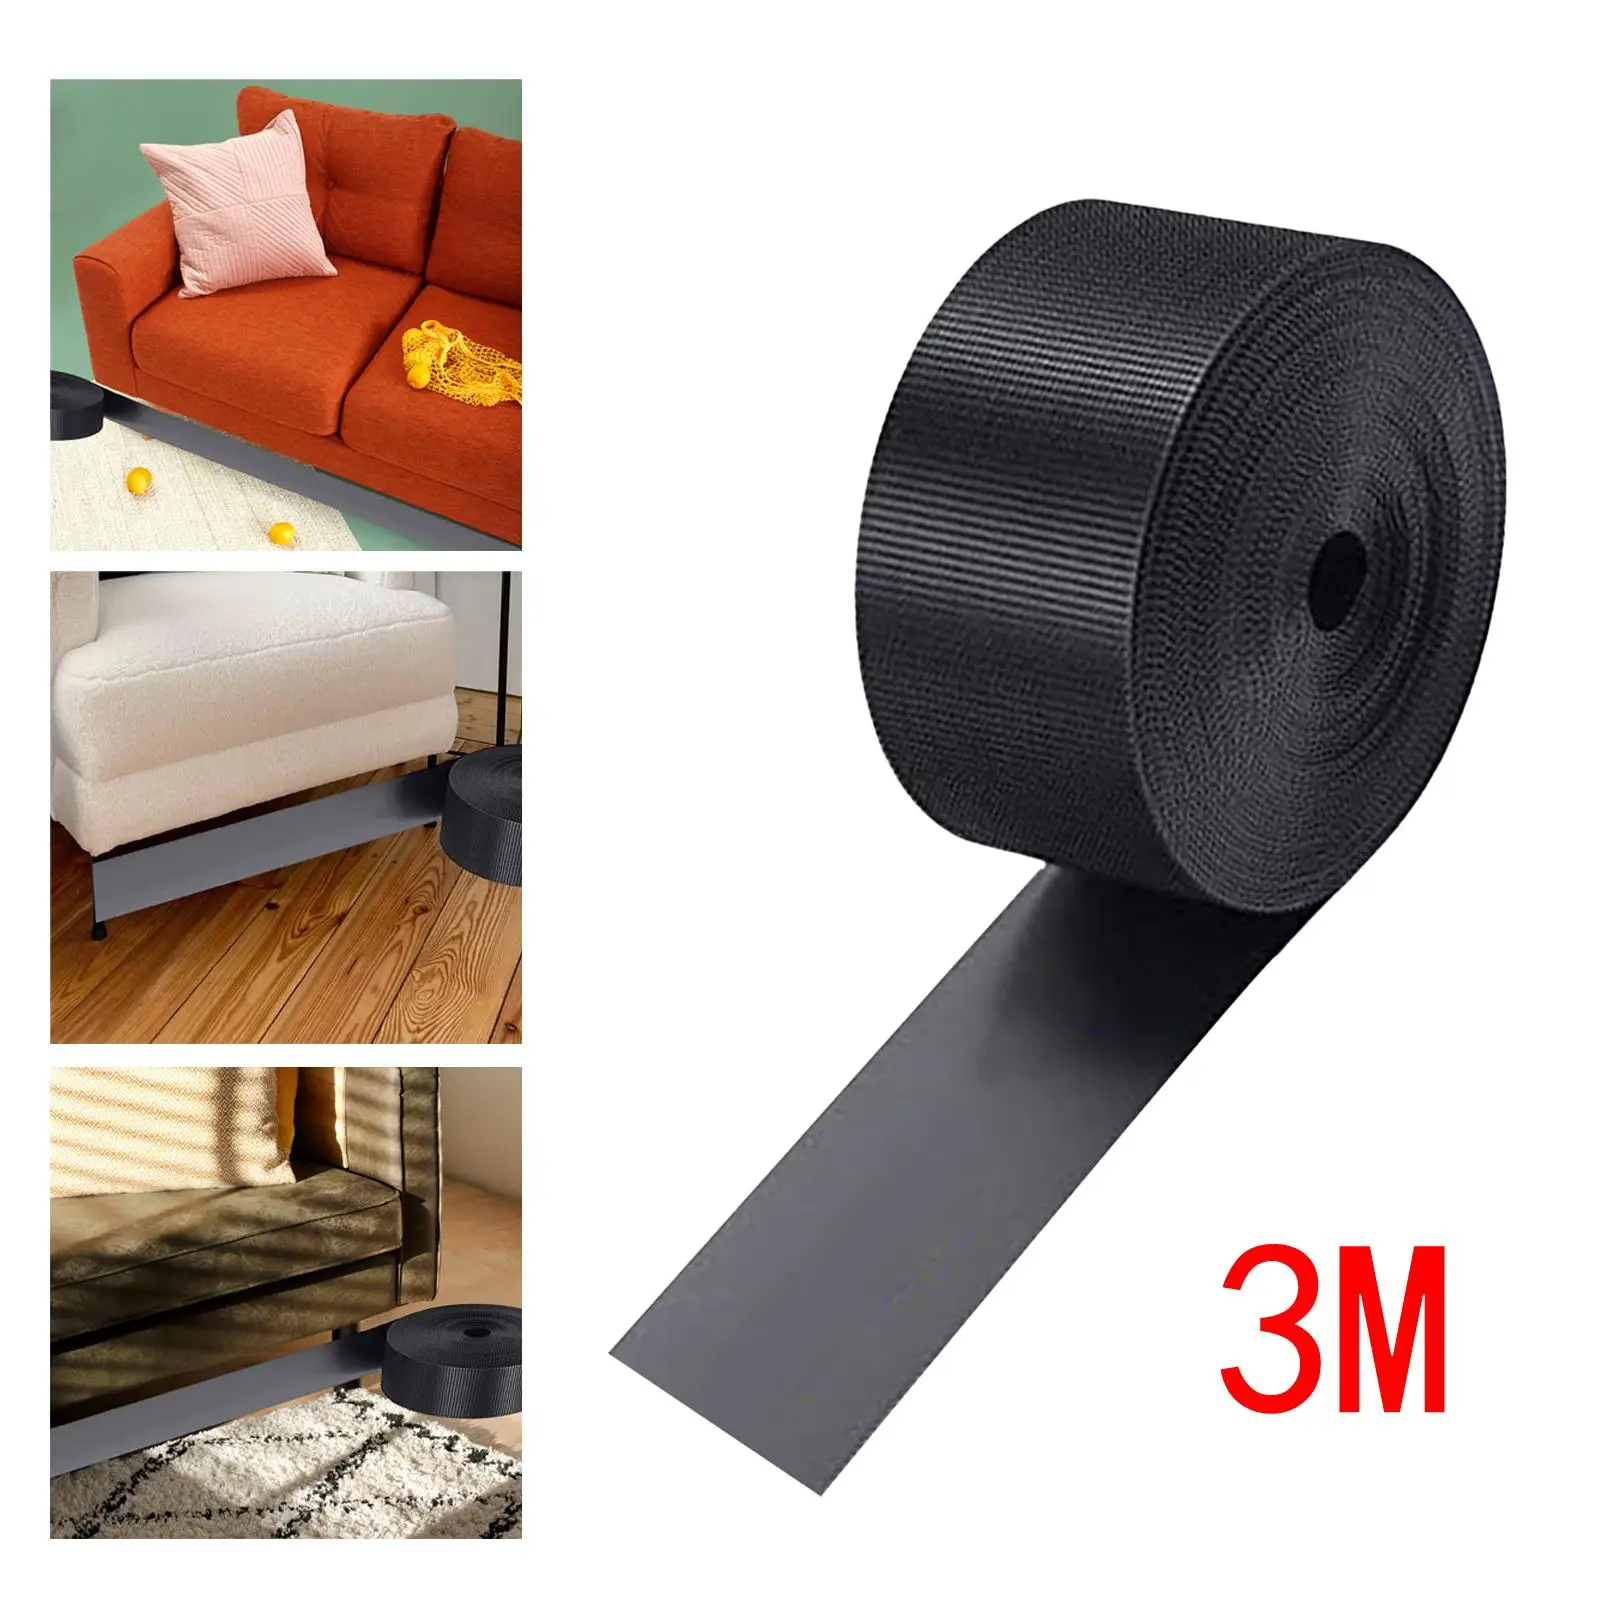 Multipurpose Sofa Toy Baffle Durable Sectional Connector Adjustable Barrier Gap Baffle for Living Room Bedroom Sofa Bed